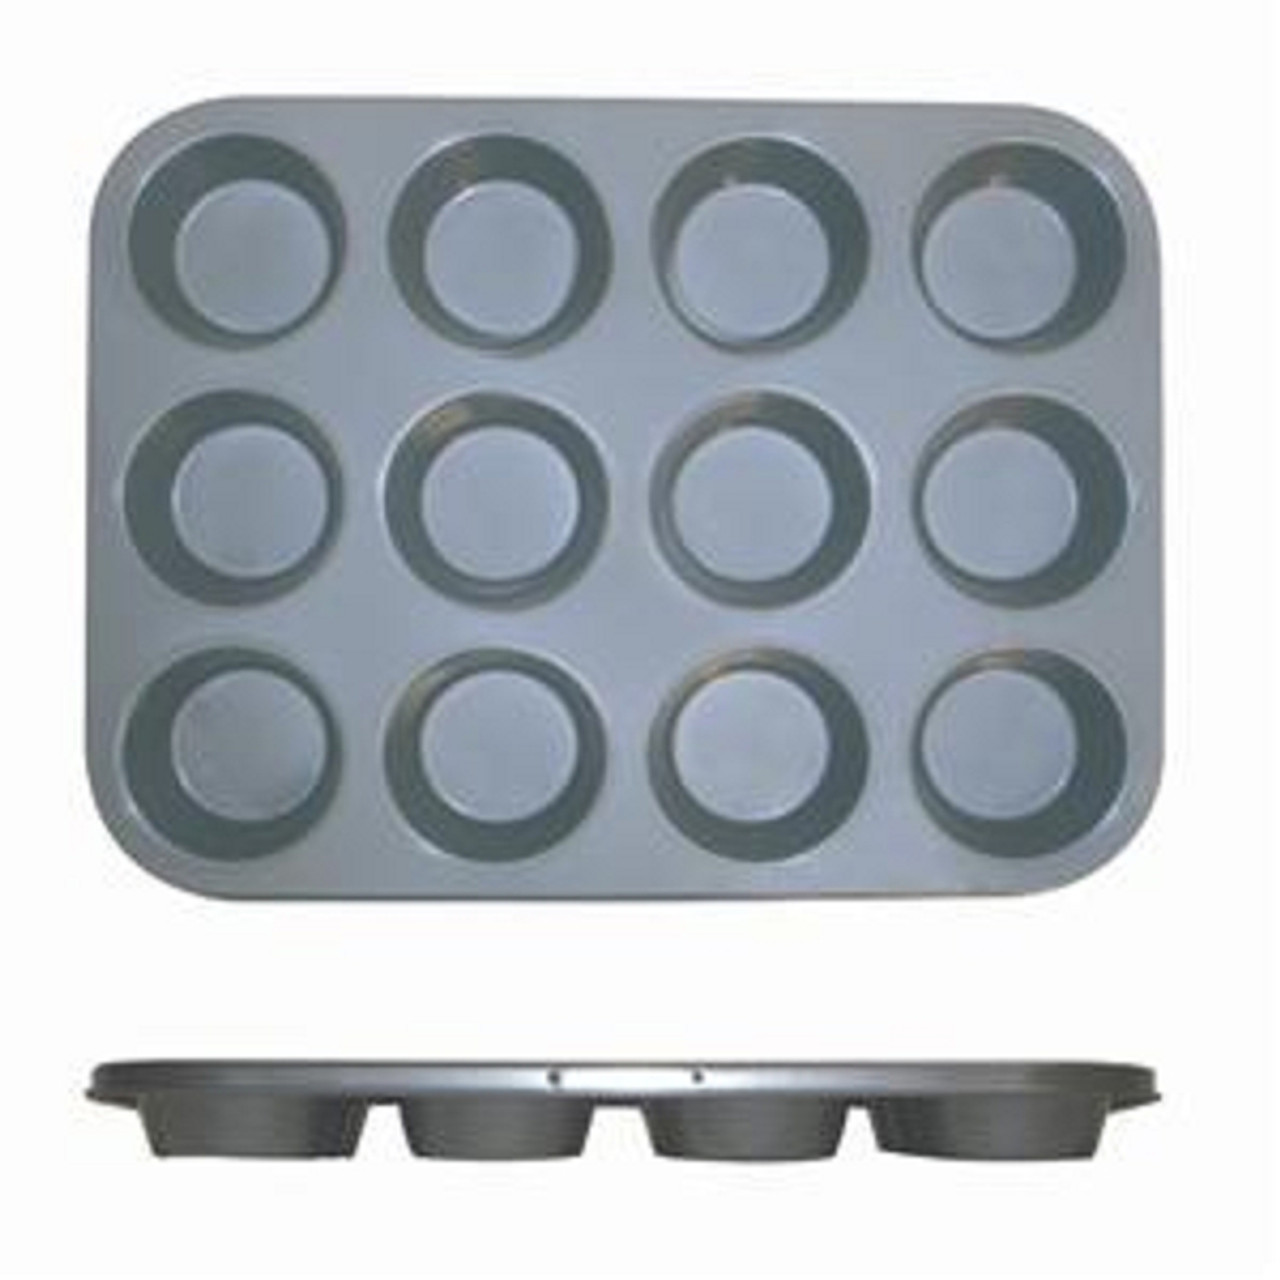 24 CUP MUFFIN PAN - NON STICK (0.4M/M), 3.5 OZ EACH CUP